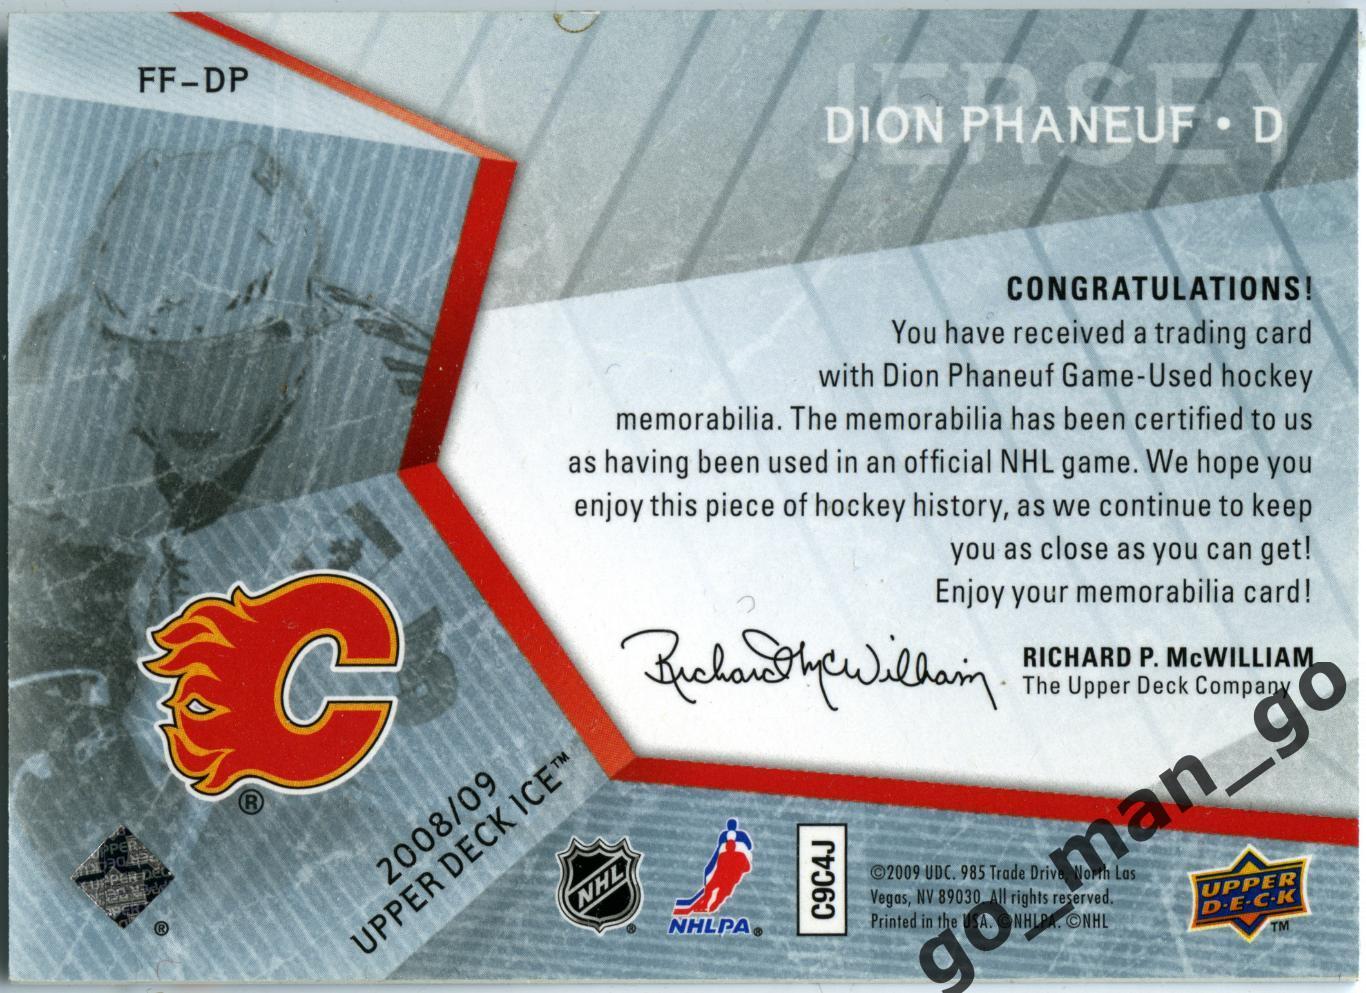 Dion Phaneuf (Calgary Flames), Game Jersey. Upper Deck Ice 2008-2009, № FF-DP. 1